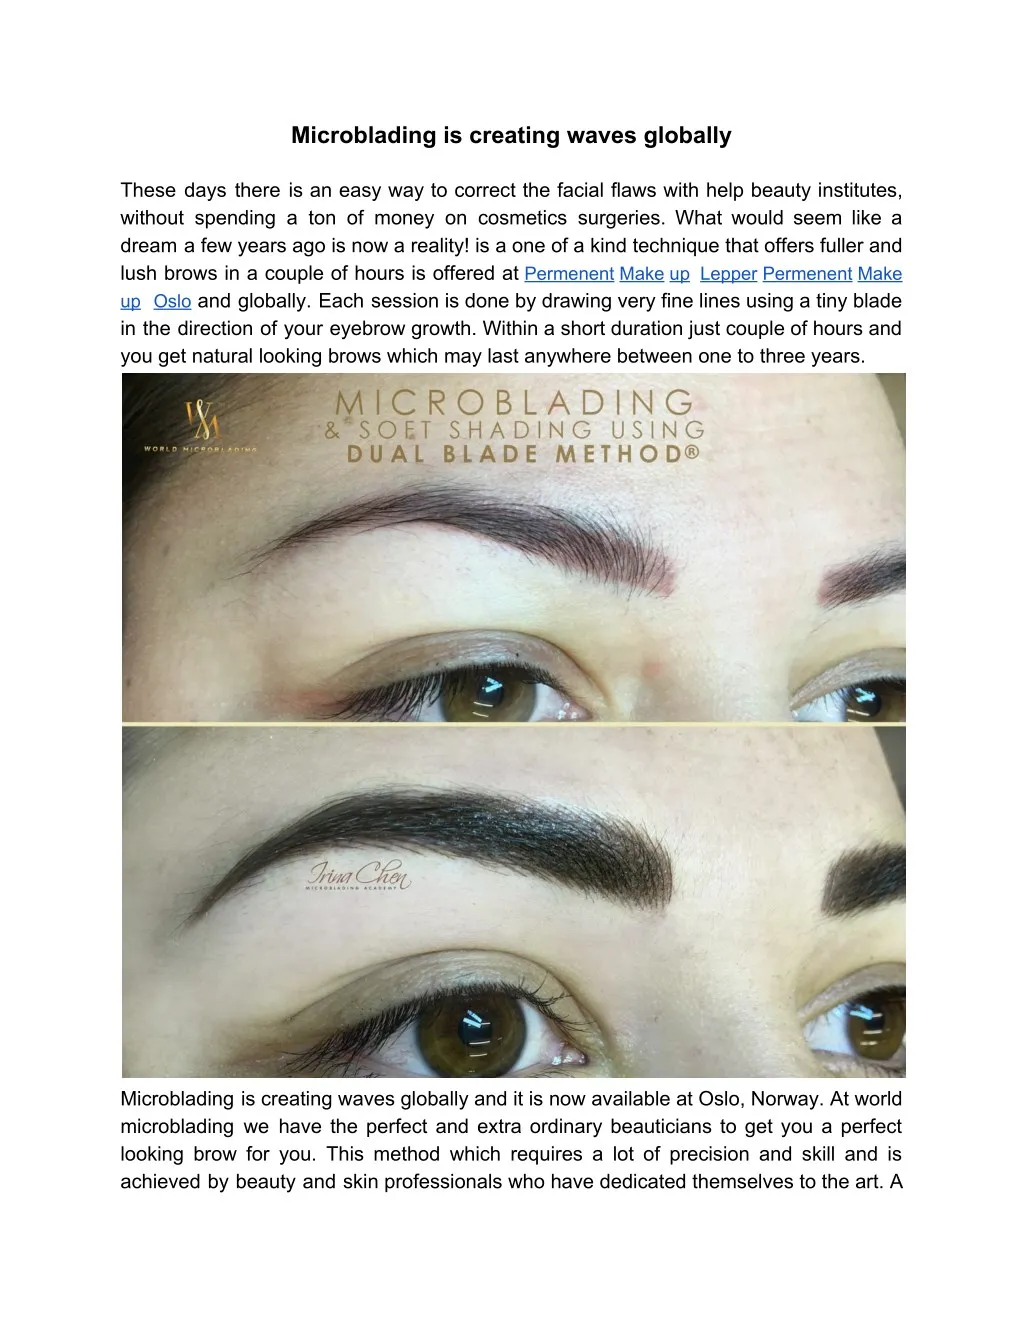 microblading is creating waves globally